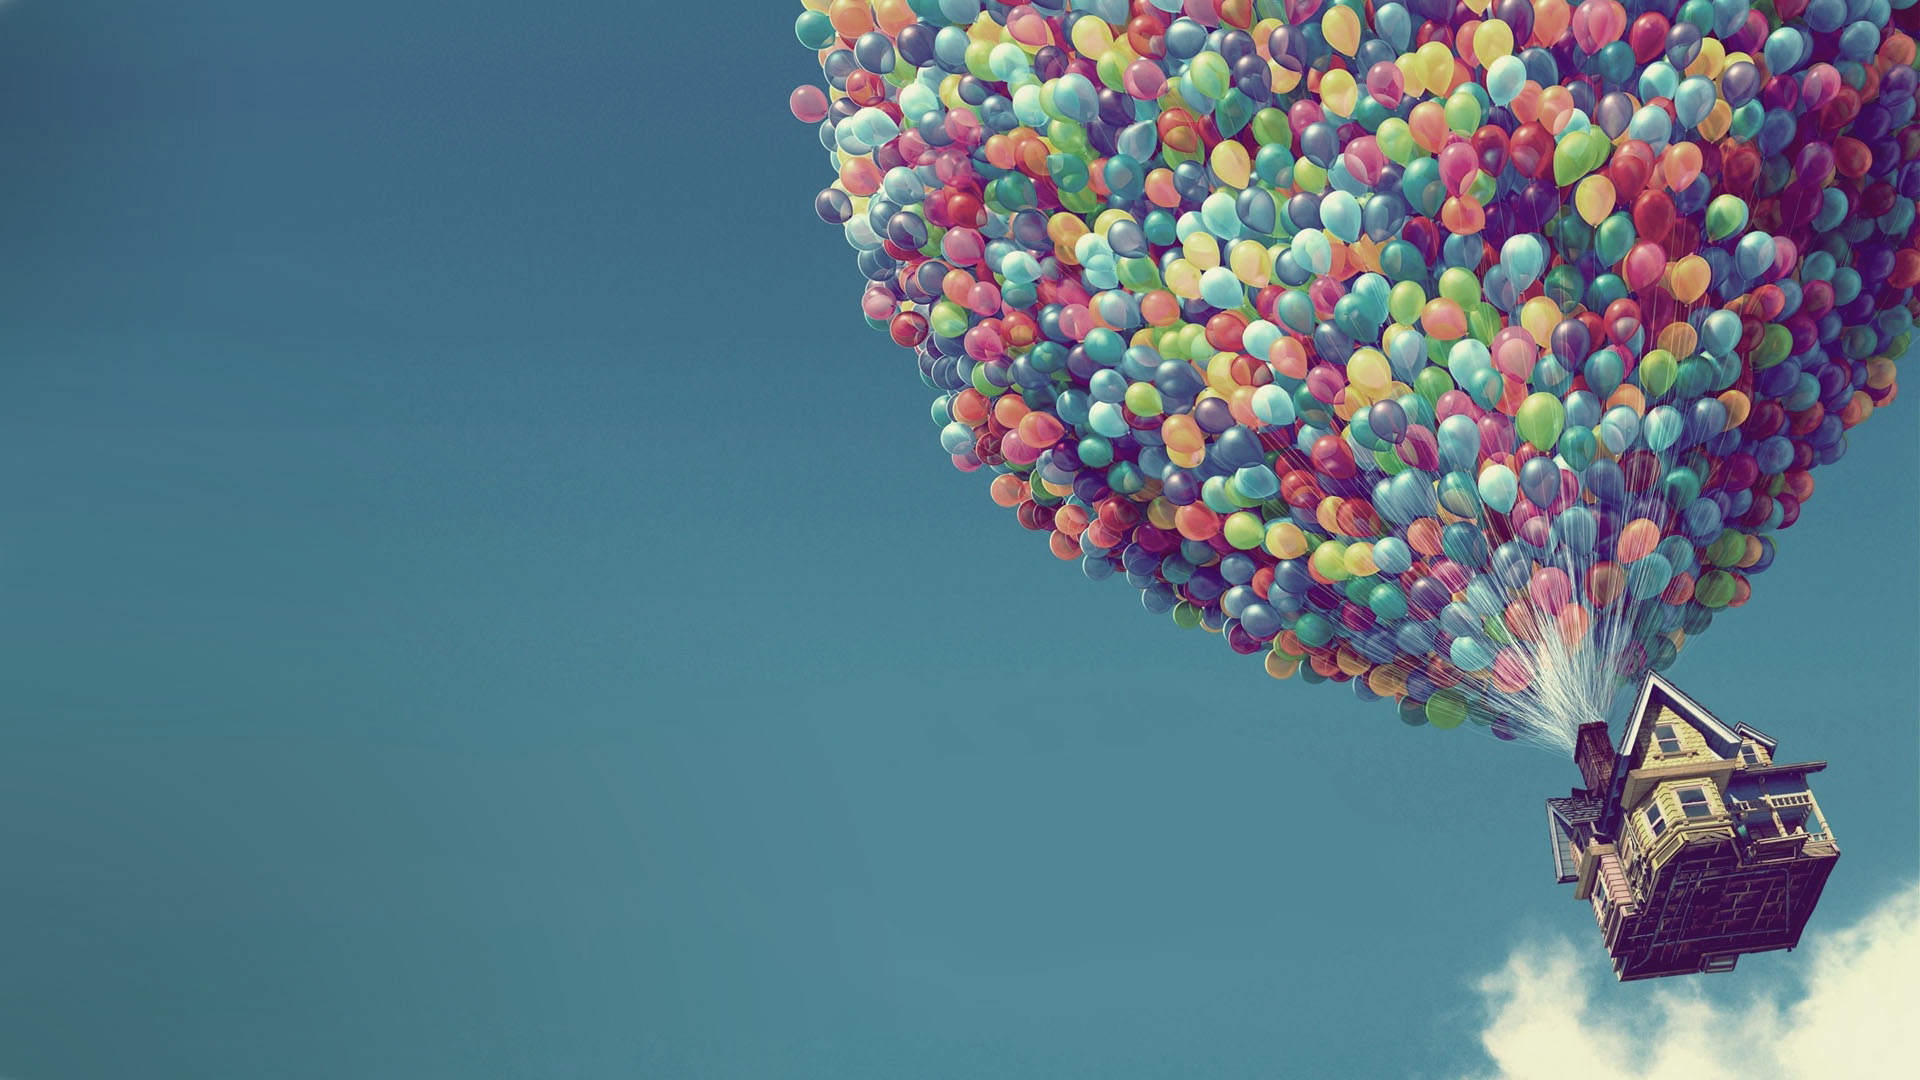 HD Wallpaper Balloons And The House In Sky Full